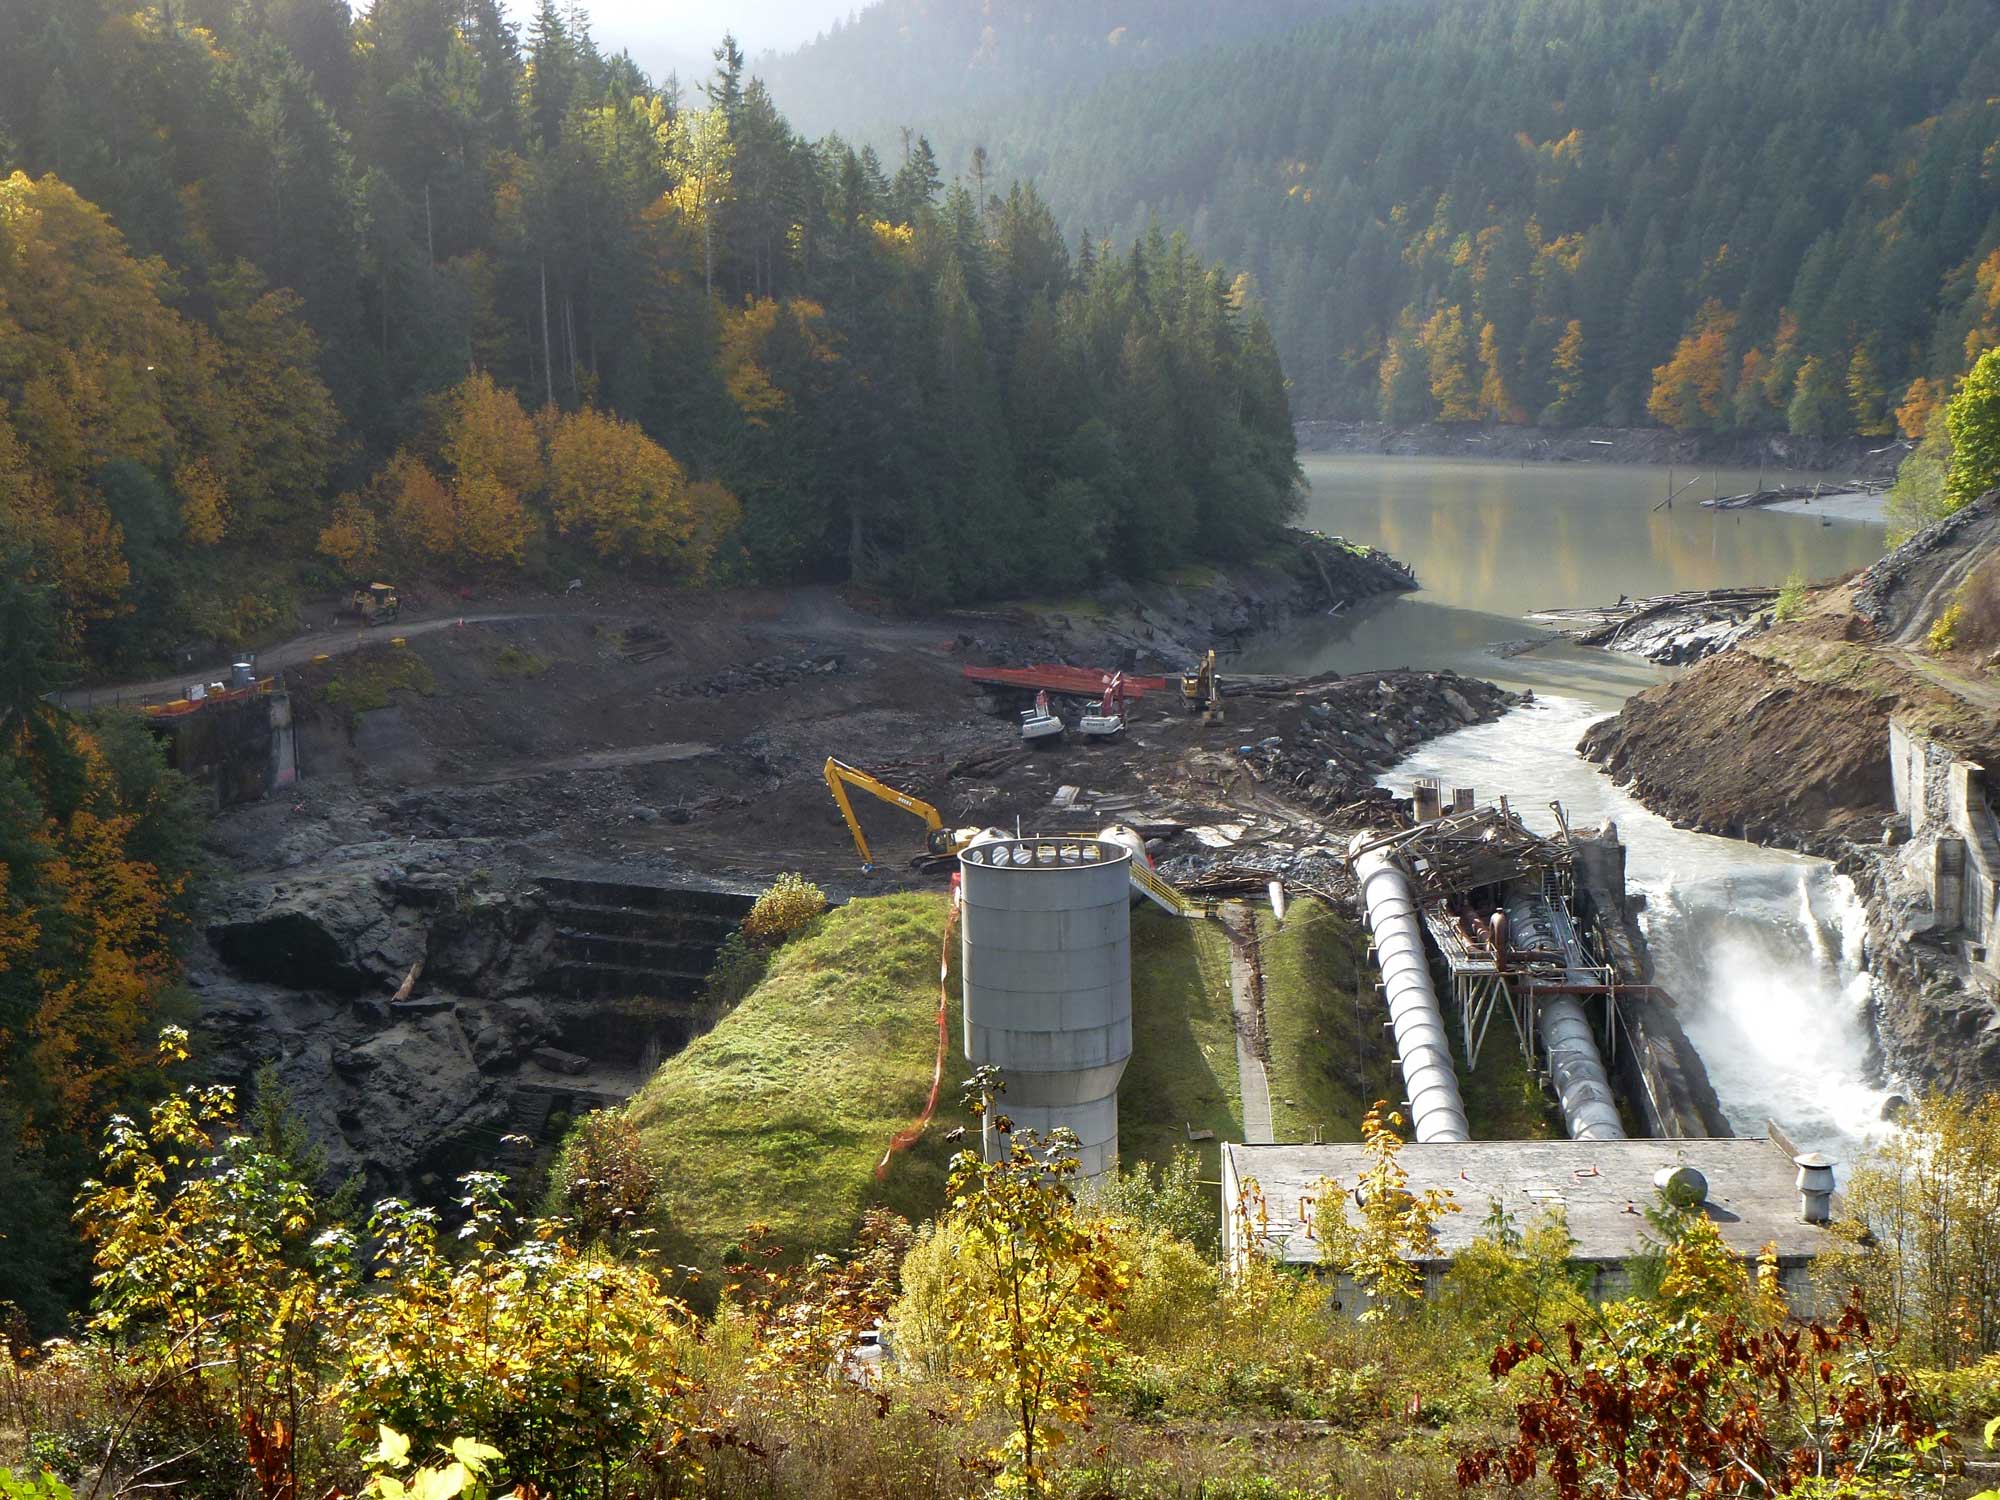 Photograph of the Elwha Dam removal on the Elwha River in Washington in 2011. In this photo, the dam is mostly removed, although some of the structures associated with it remain. Water flows through the area where the breached dam once was. Some construction equipment can be seen near the former dam site.